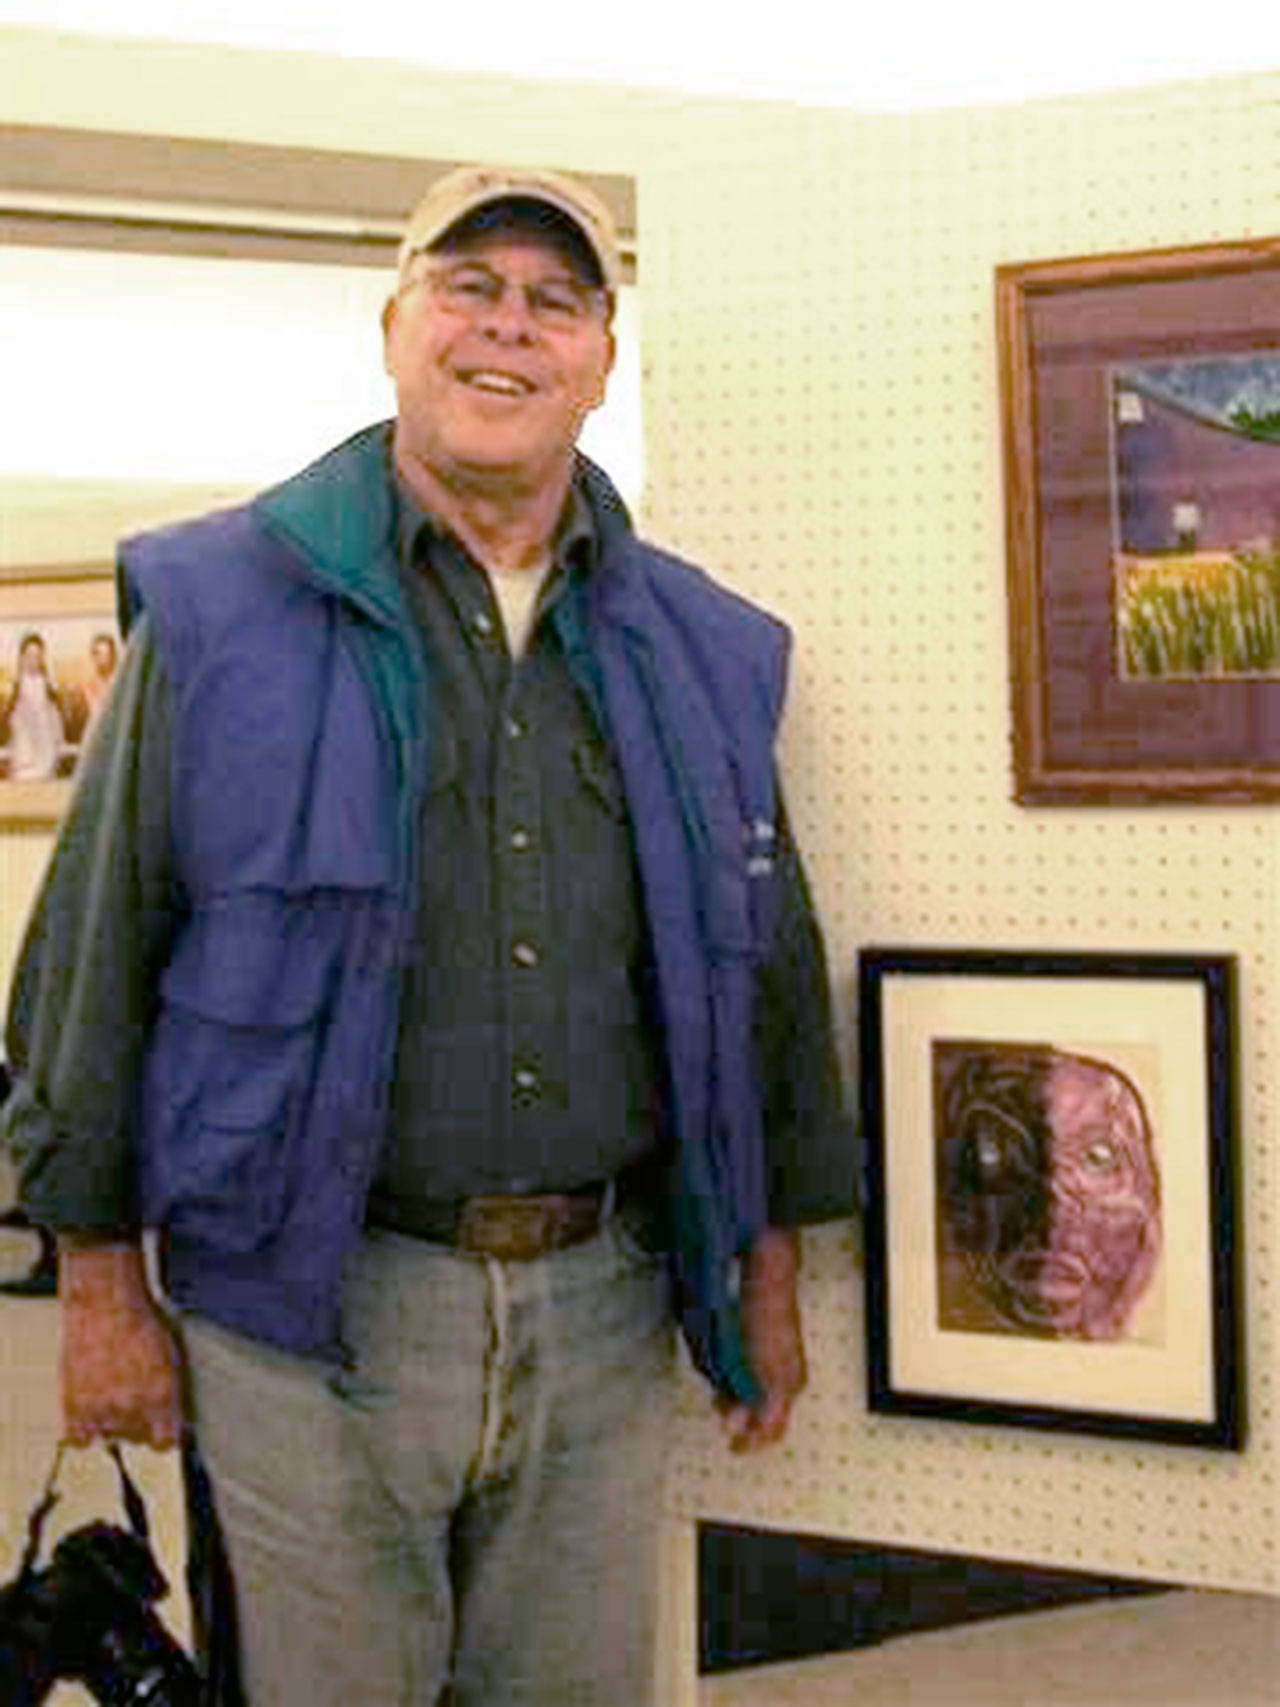 Randy Radock is the Artist of the Month at the Harbor Art Gallery at 114 North Laurel St., Port Angeles.